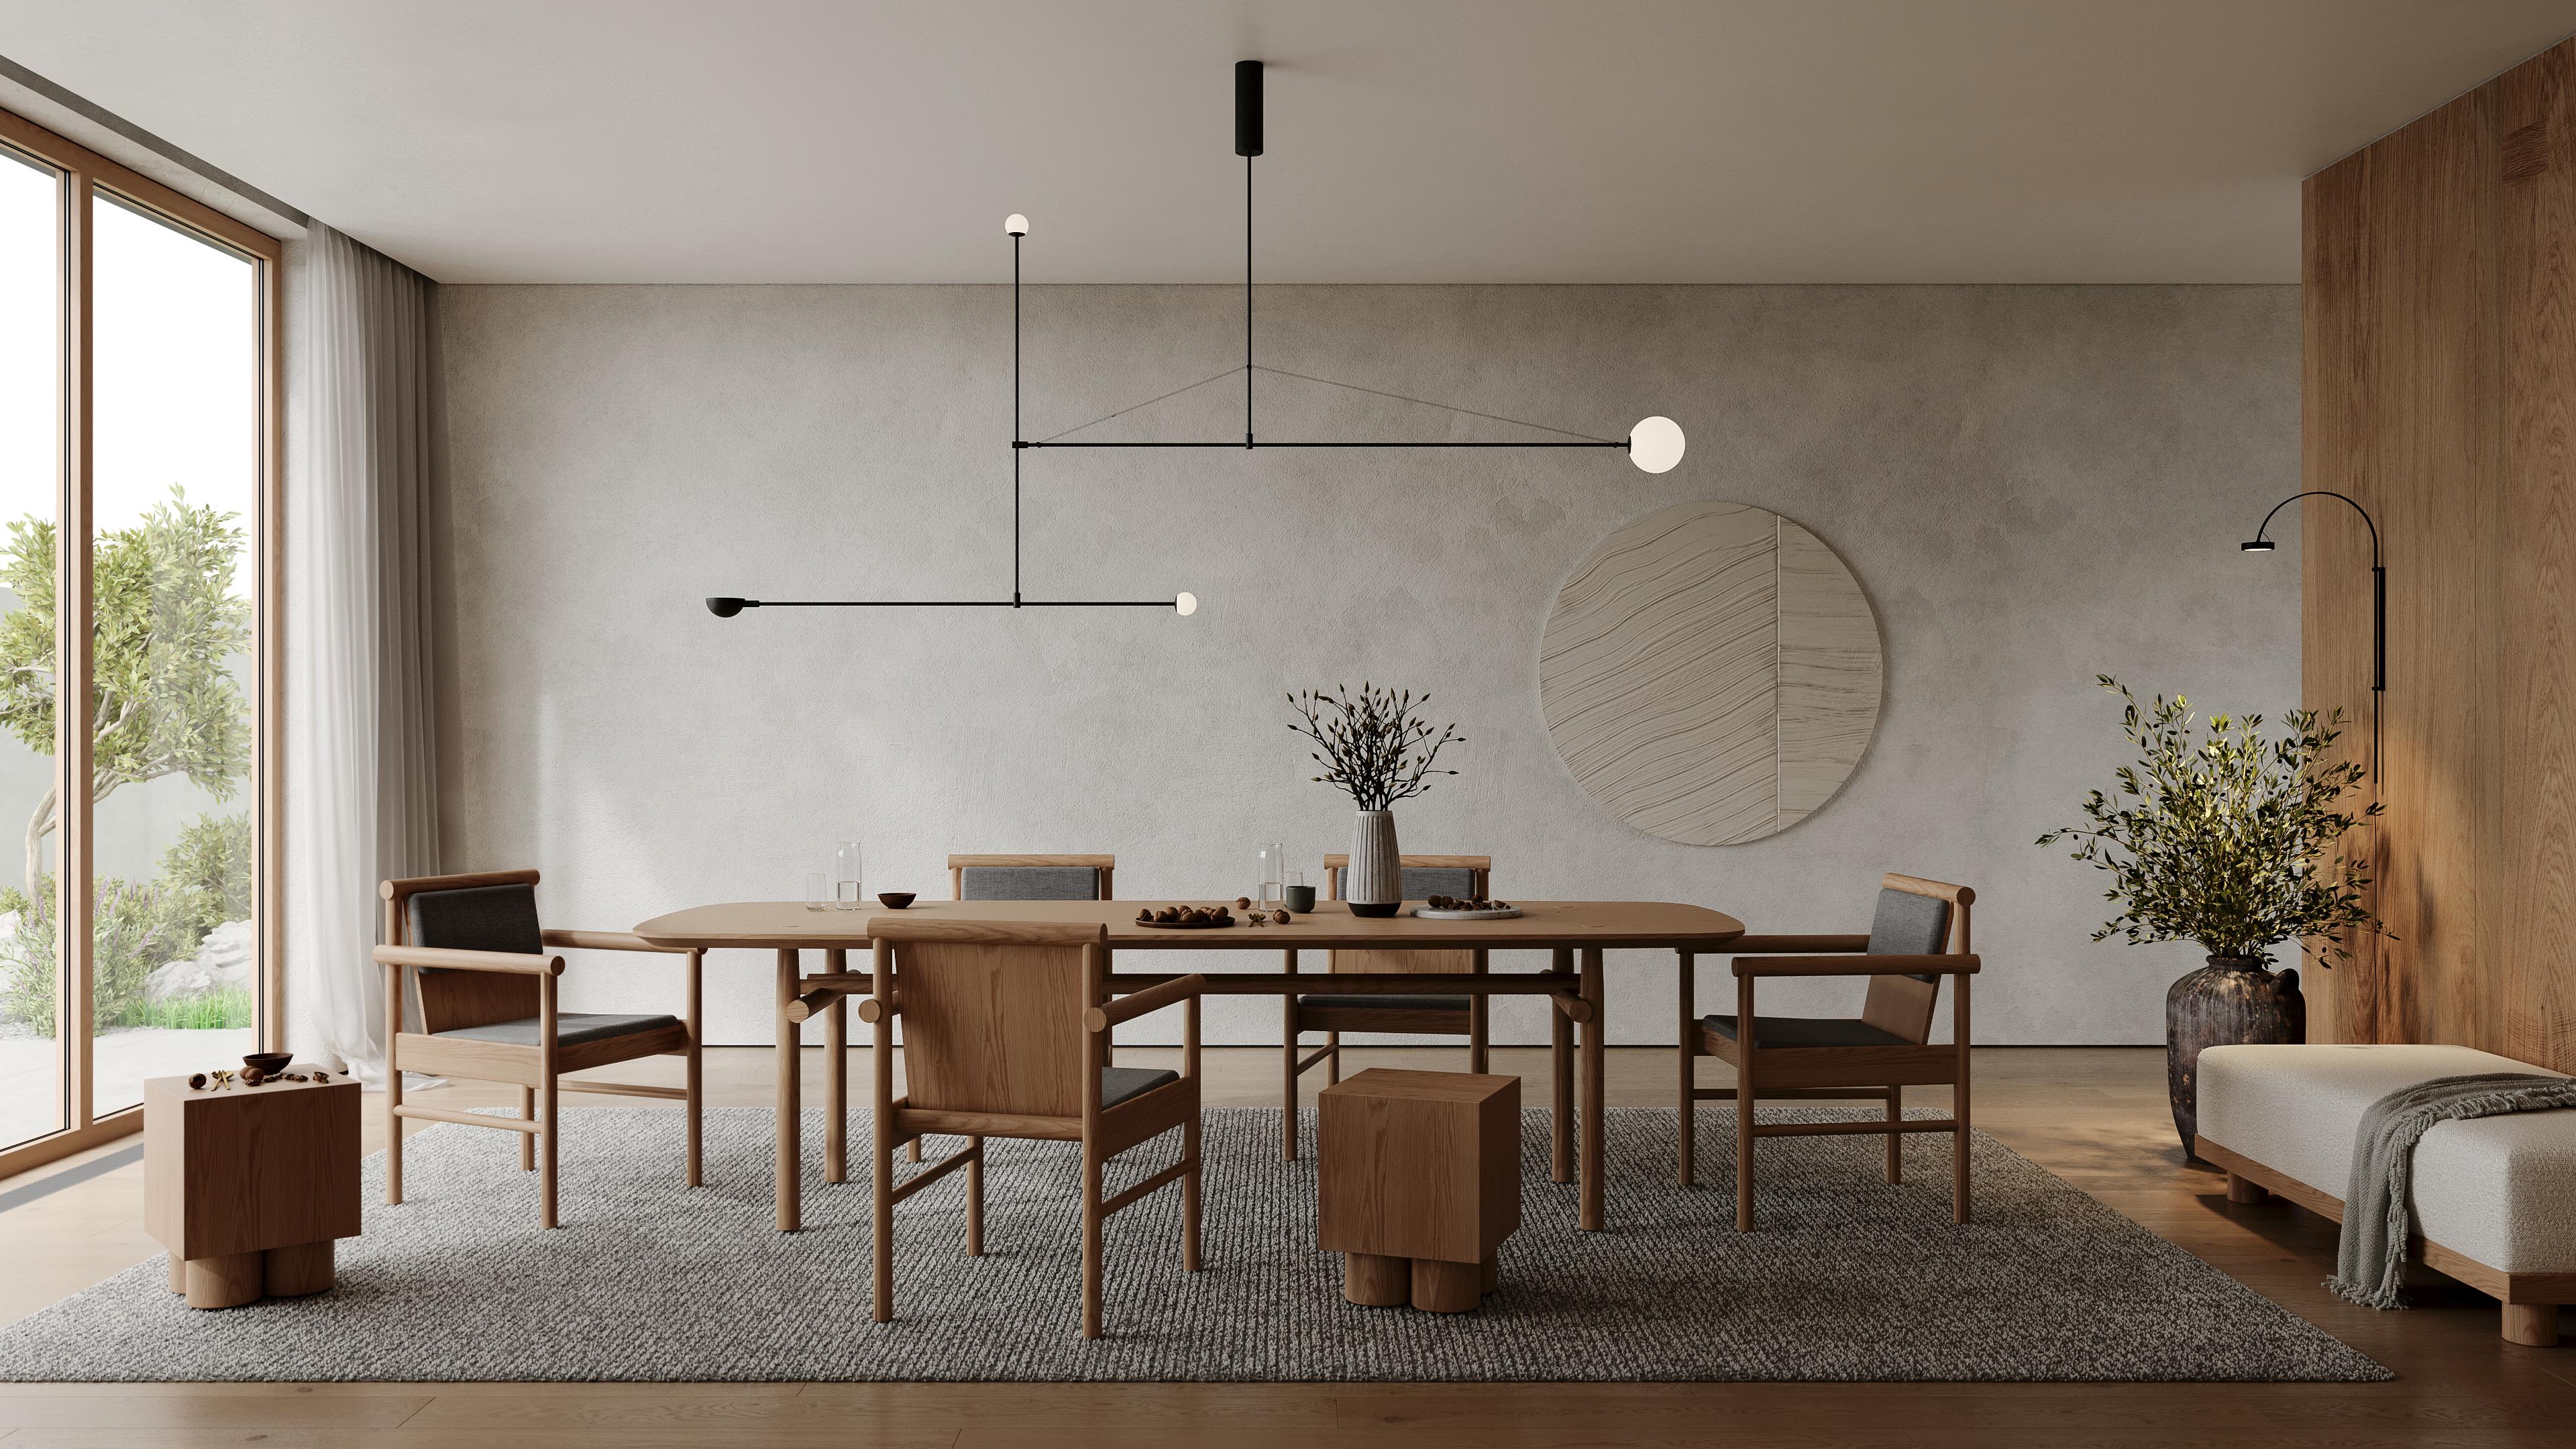 The Steekla Table range offers a range of sizes to accommodate comfortable dining and conversation for groups of 6 or 8 people. Designed with inspiration from the forest and its interconnected branches and limbs, this table range showcases the